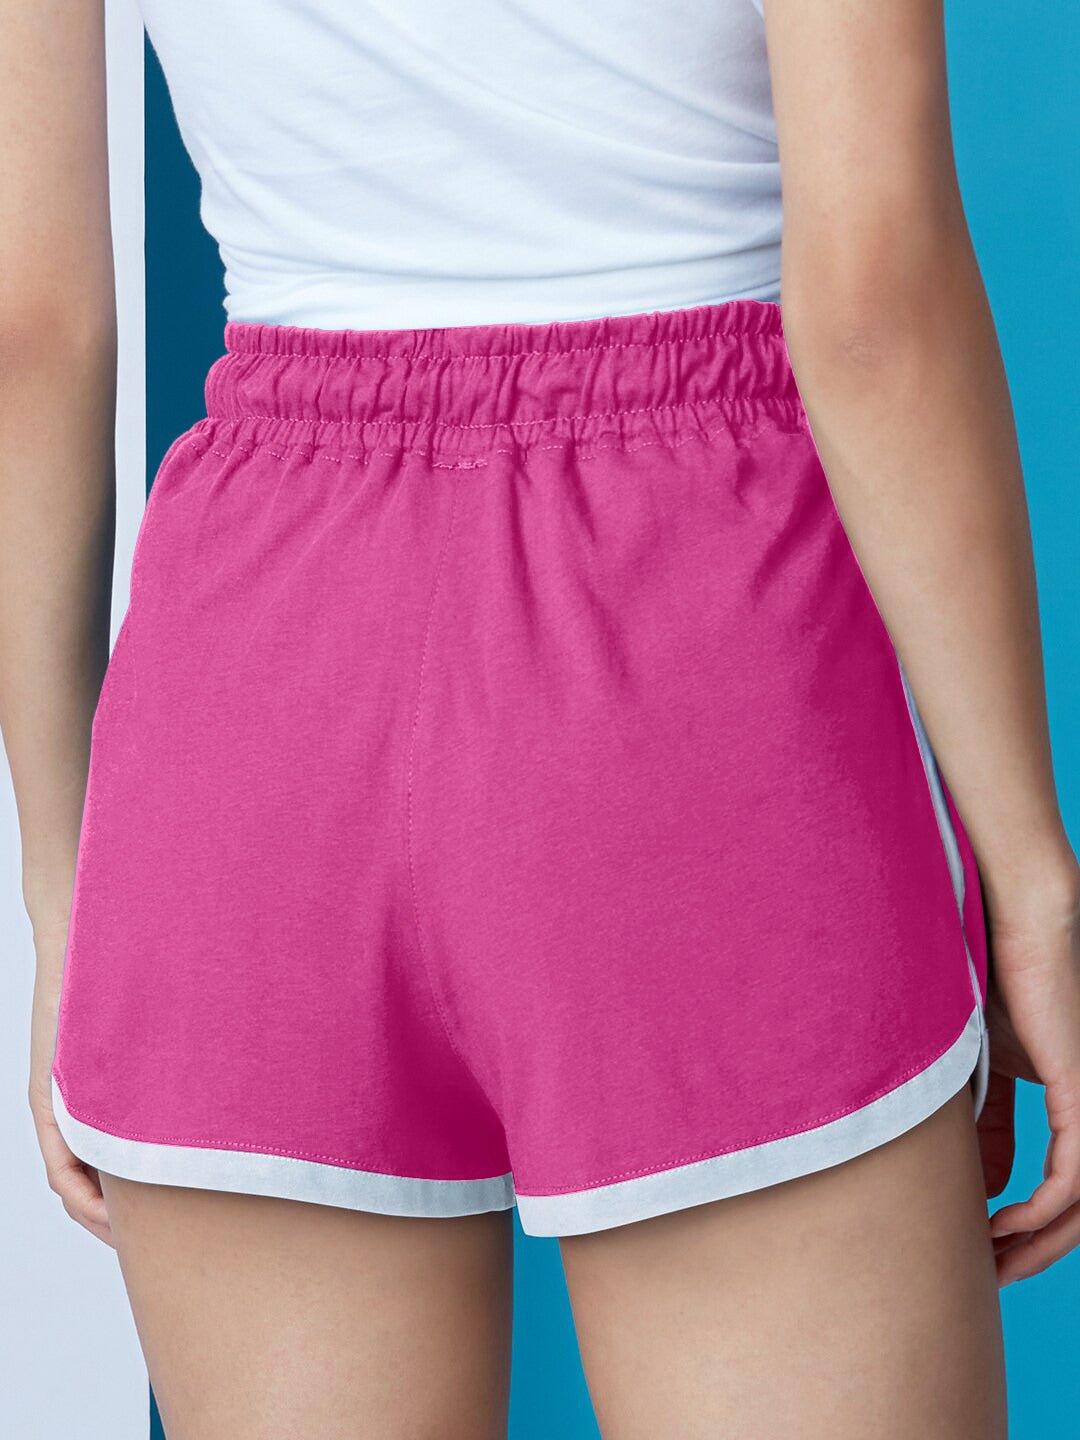 Shorts For Women In Pink Colour variant 1